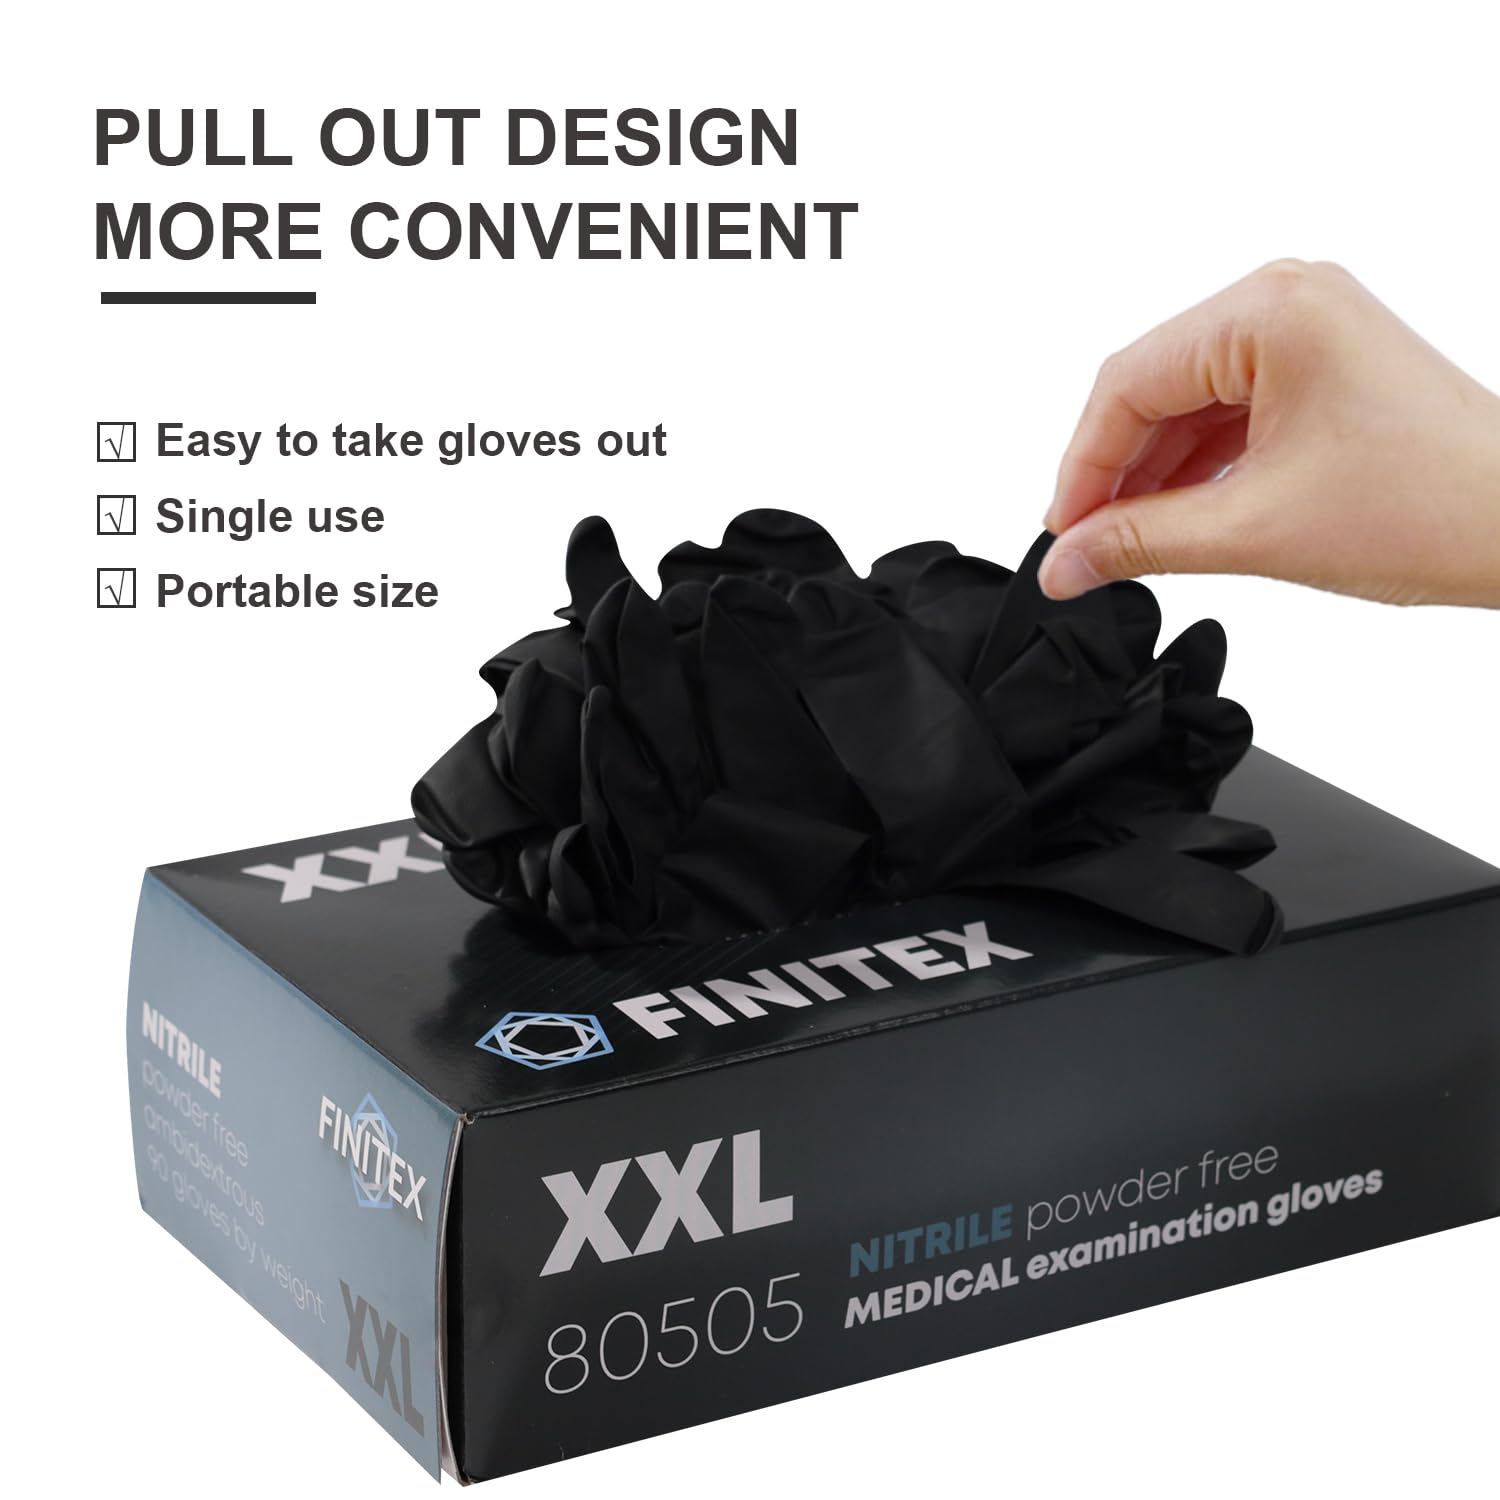 FINITEX - Black Nitrile Disposable Gloves, 5mil, Powder-free, Medical Exam Gloves Latex-Free 100 PCS For Cleaning Food Gloves (XX-Large (Pack of 90))